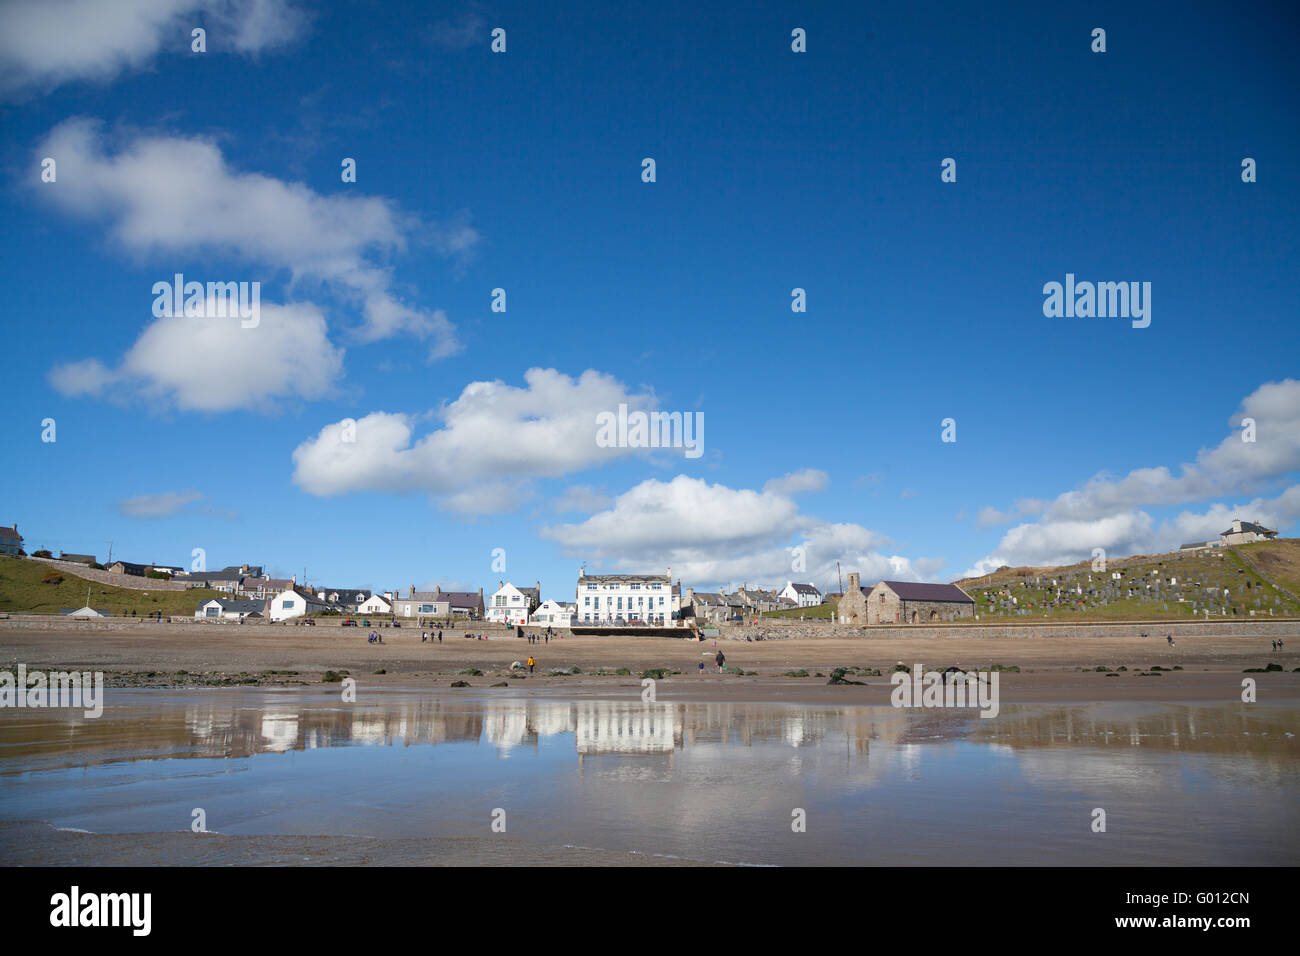 The view towards Aberdaron village (showing pub & church) taken from the beach at low tide on a summer spring day with blue sky Stock Photo